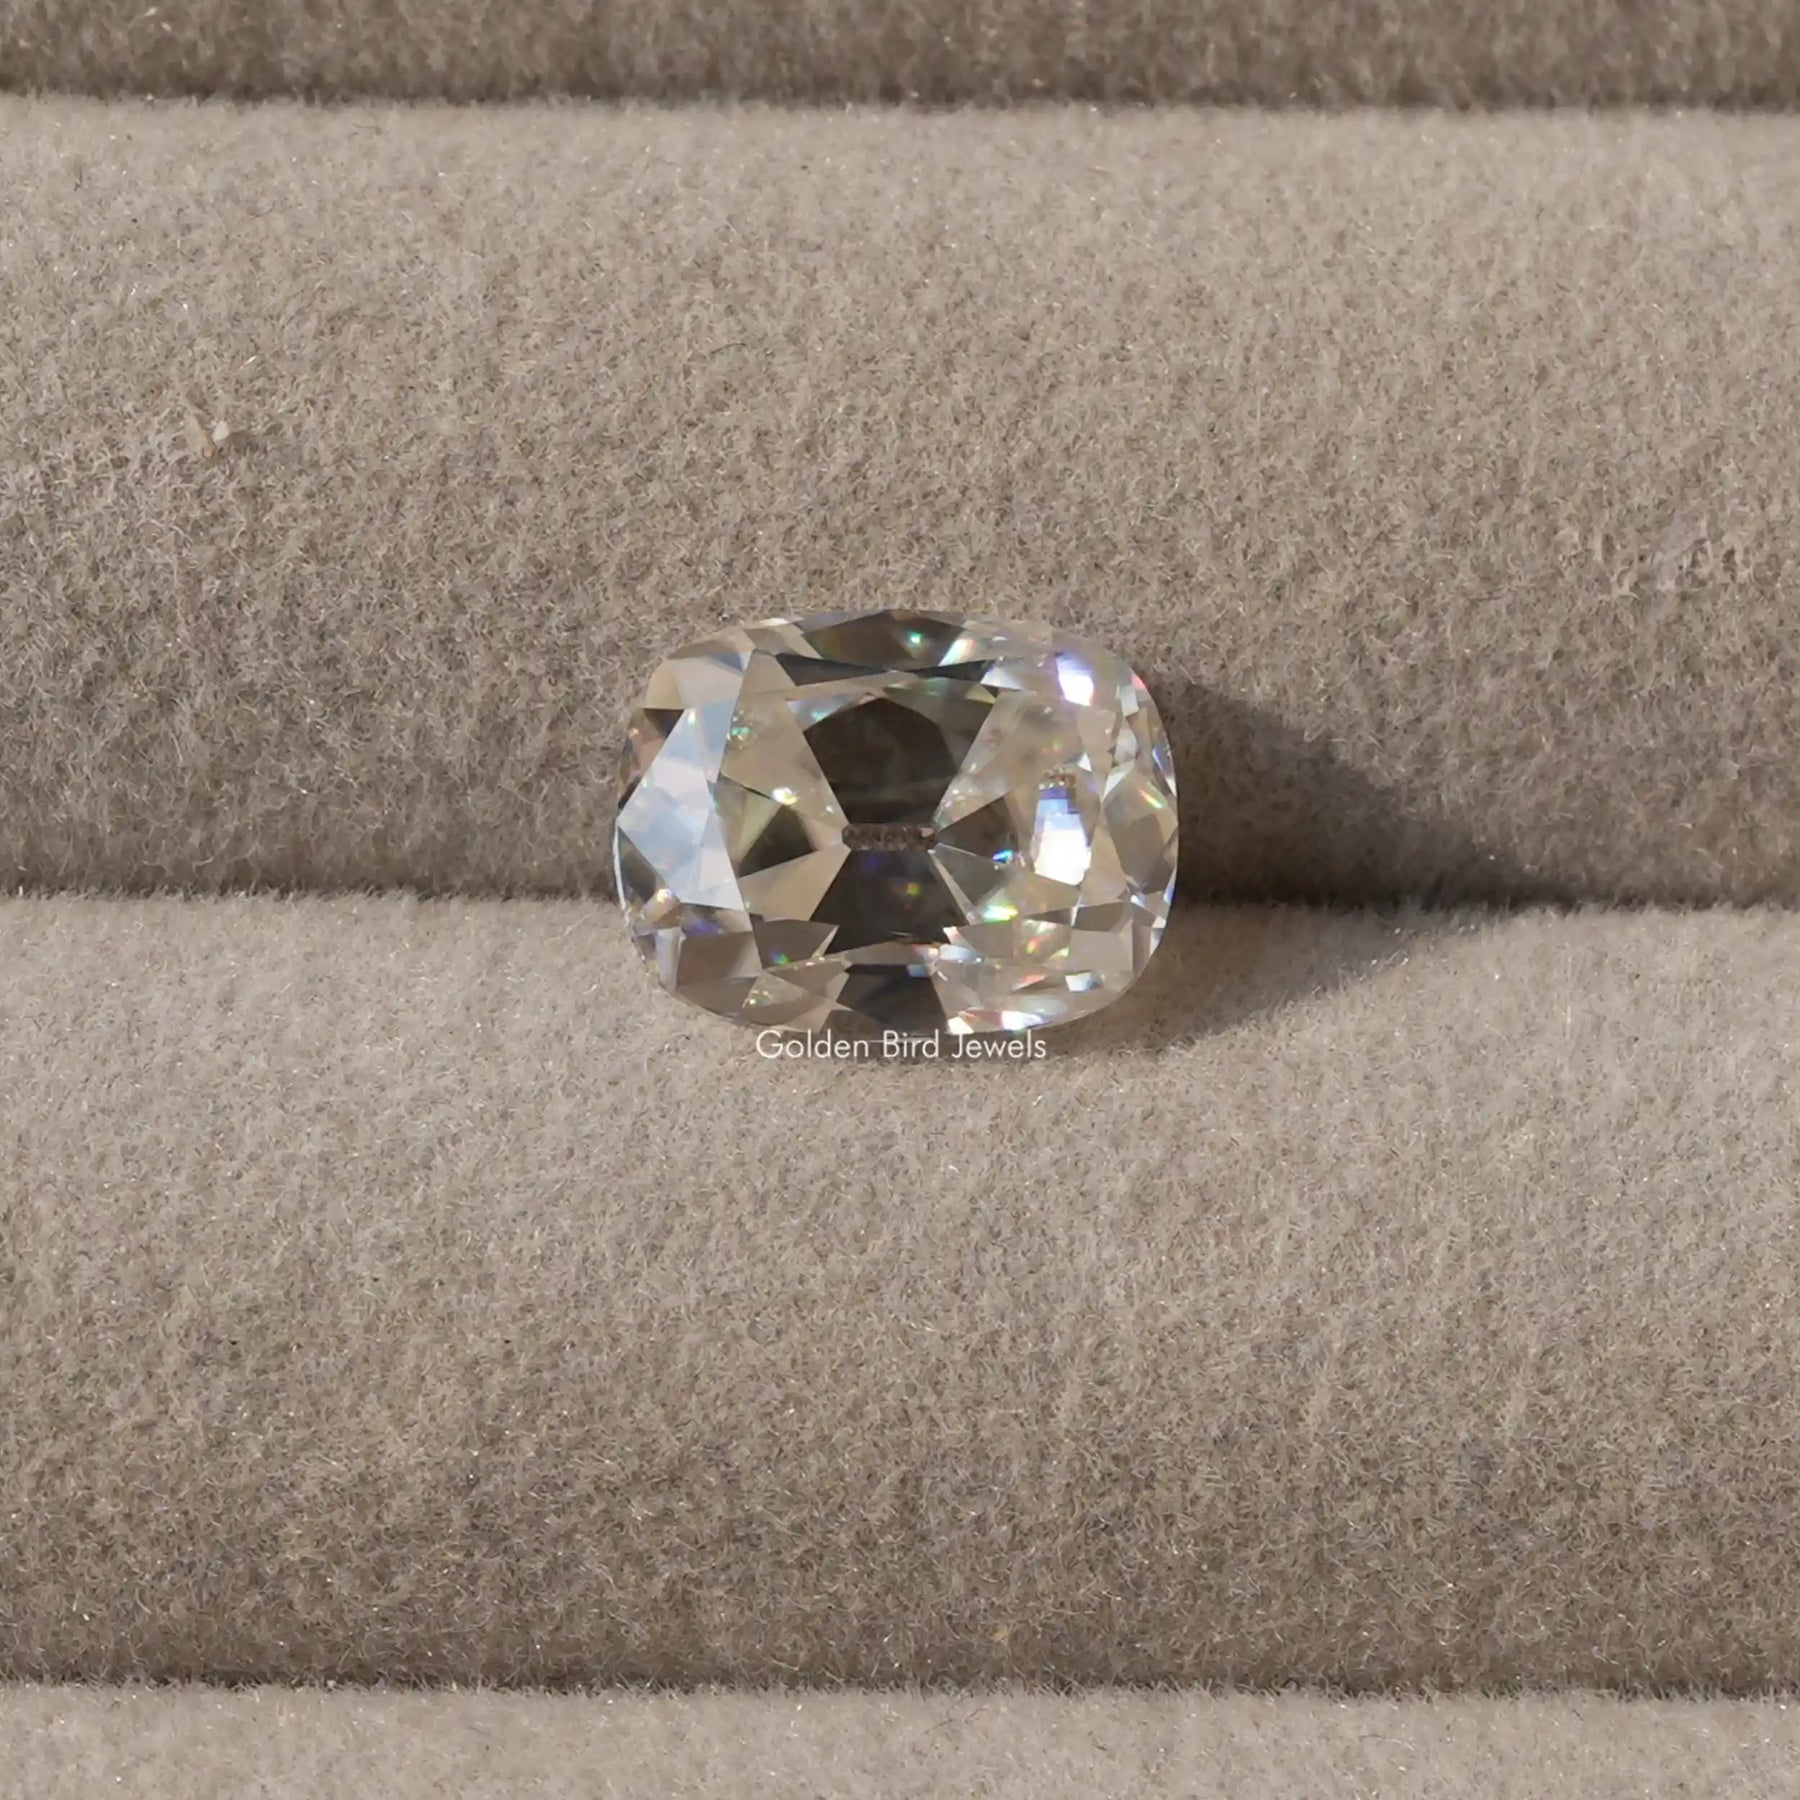 [Front view of moissanite cushion cut loose stone crafted with near colorless]-[Golden Bird Jewels]